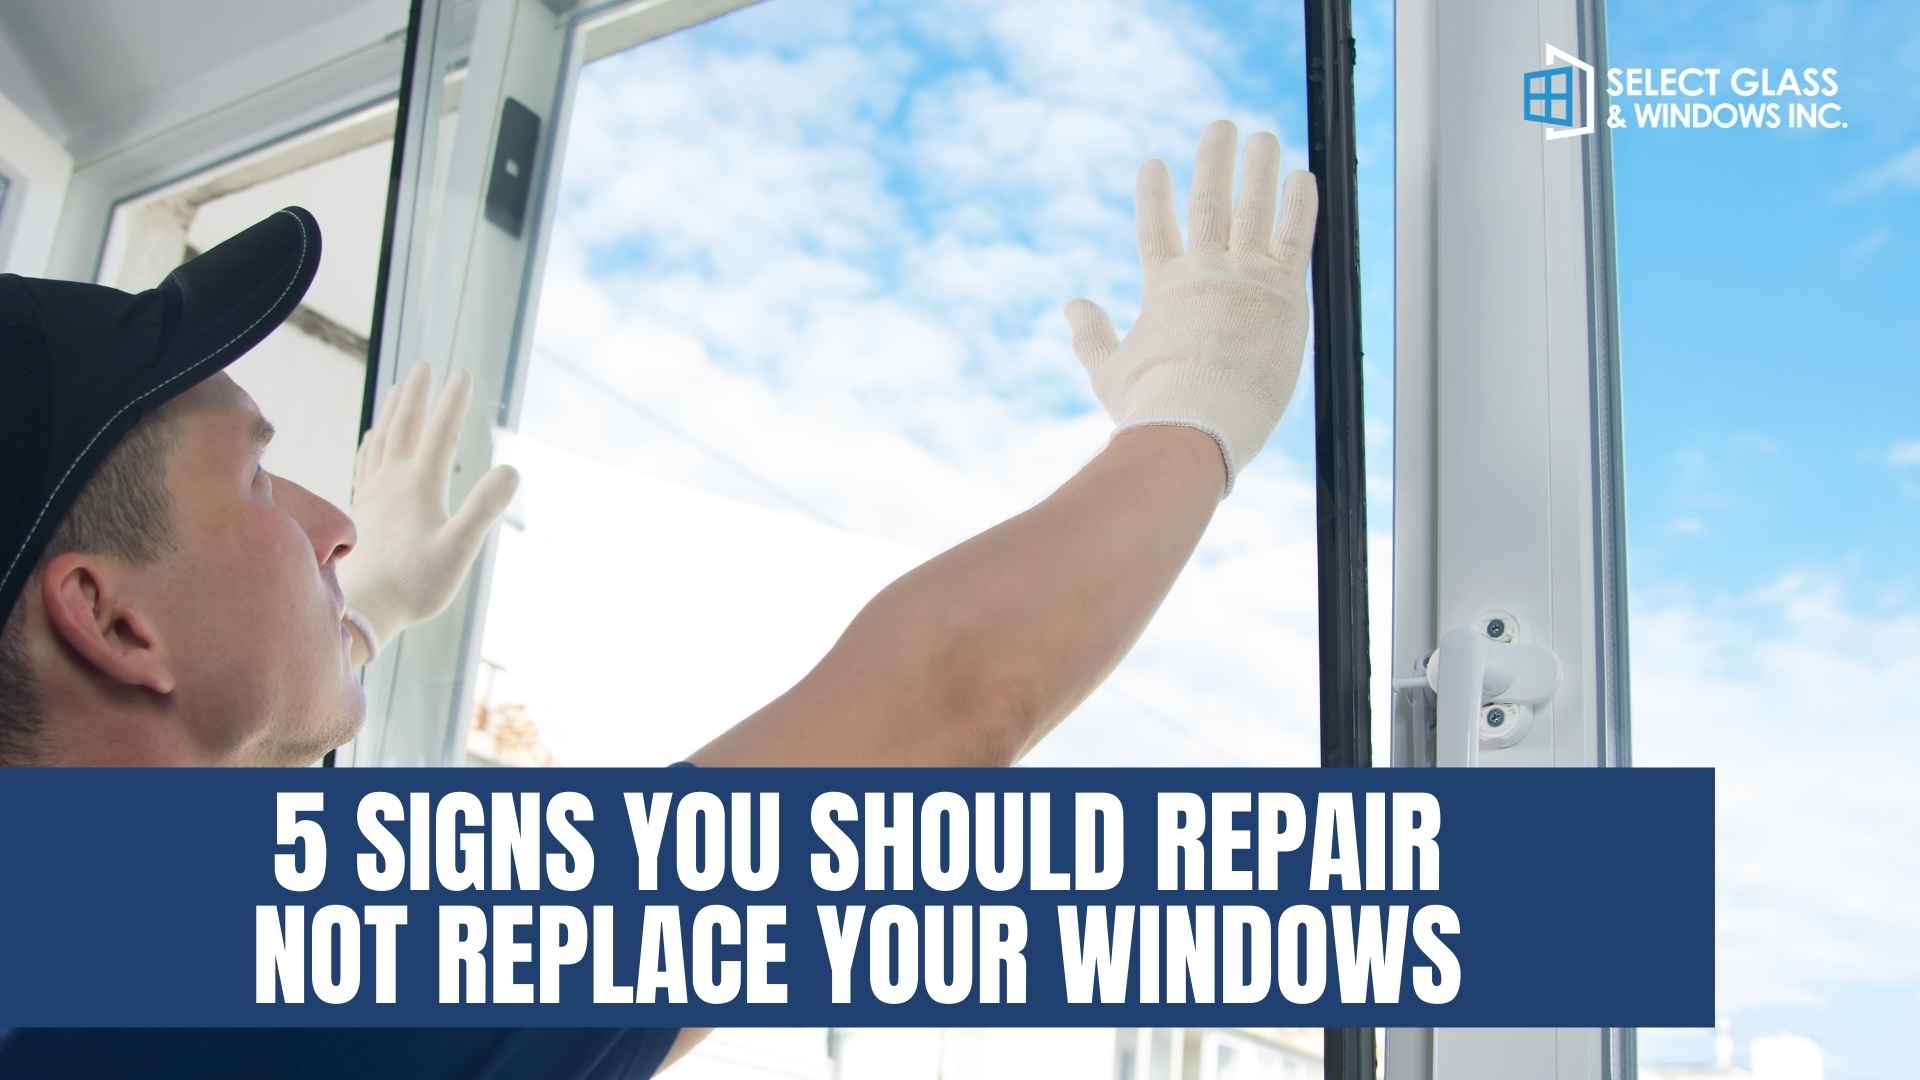 5 Signs You Should Replace Not Repair Your Windows